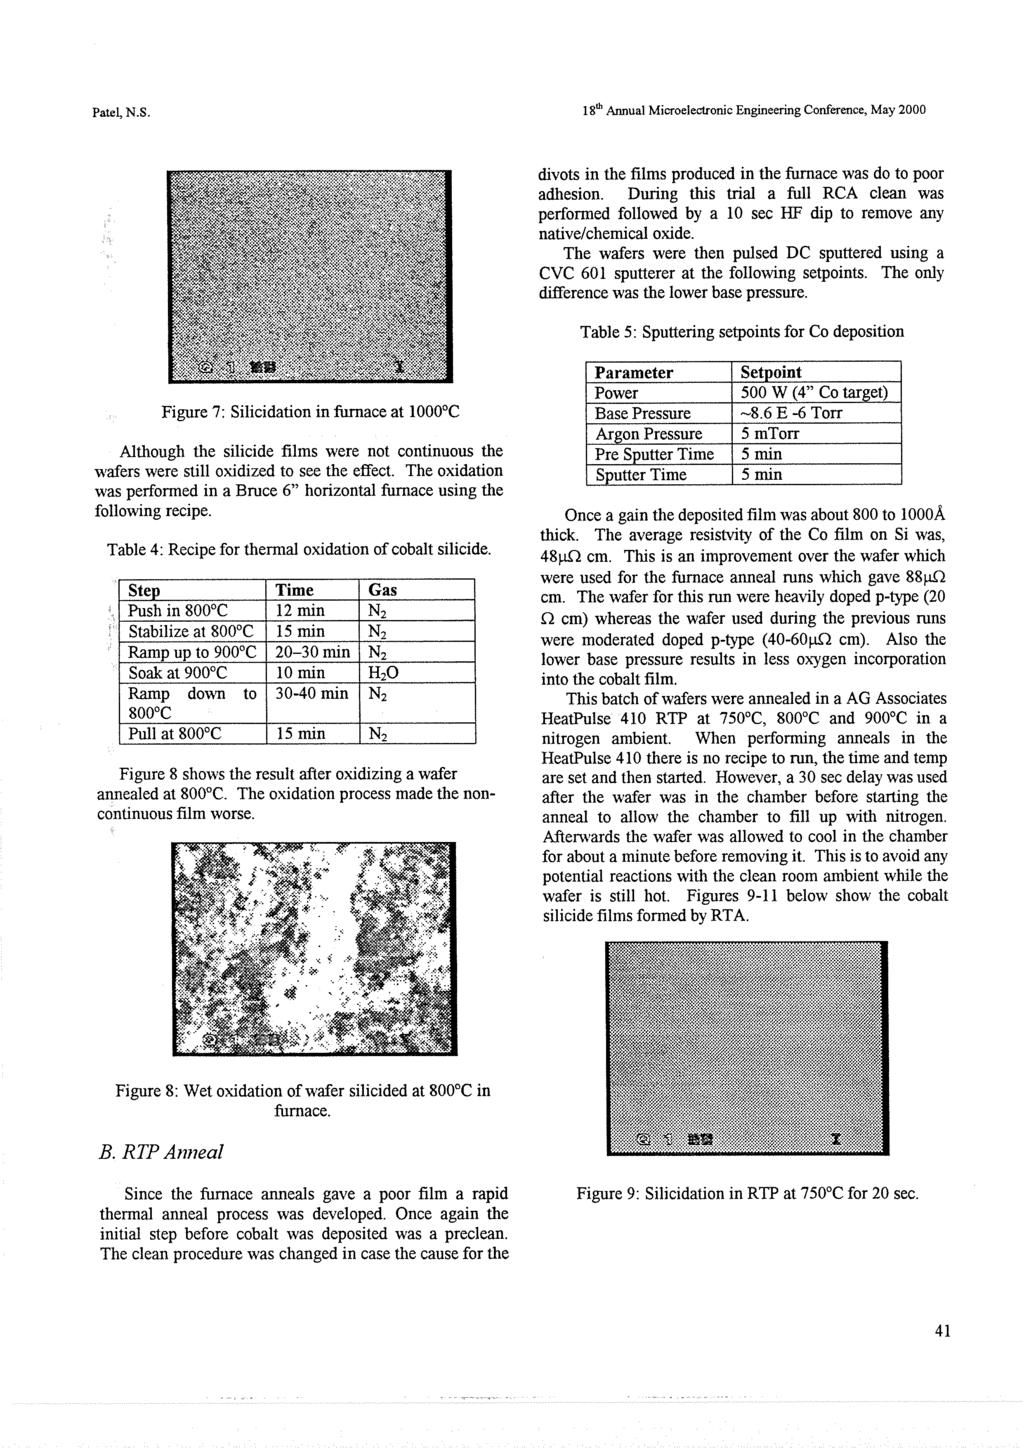 Patel,N.S. 18th Annual Microelectronic Engineering Conference, May 2000 divots in the films produced in the furnace was do to poor adhesion.